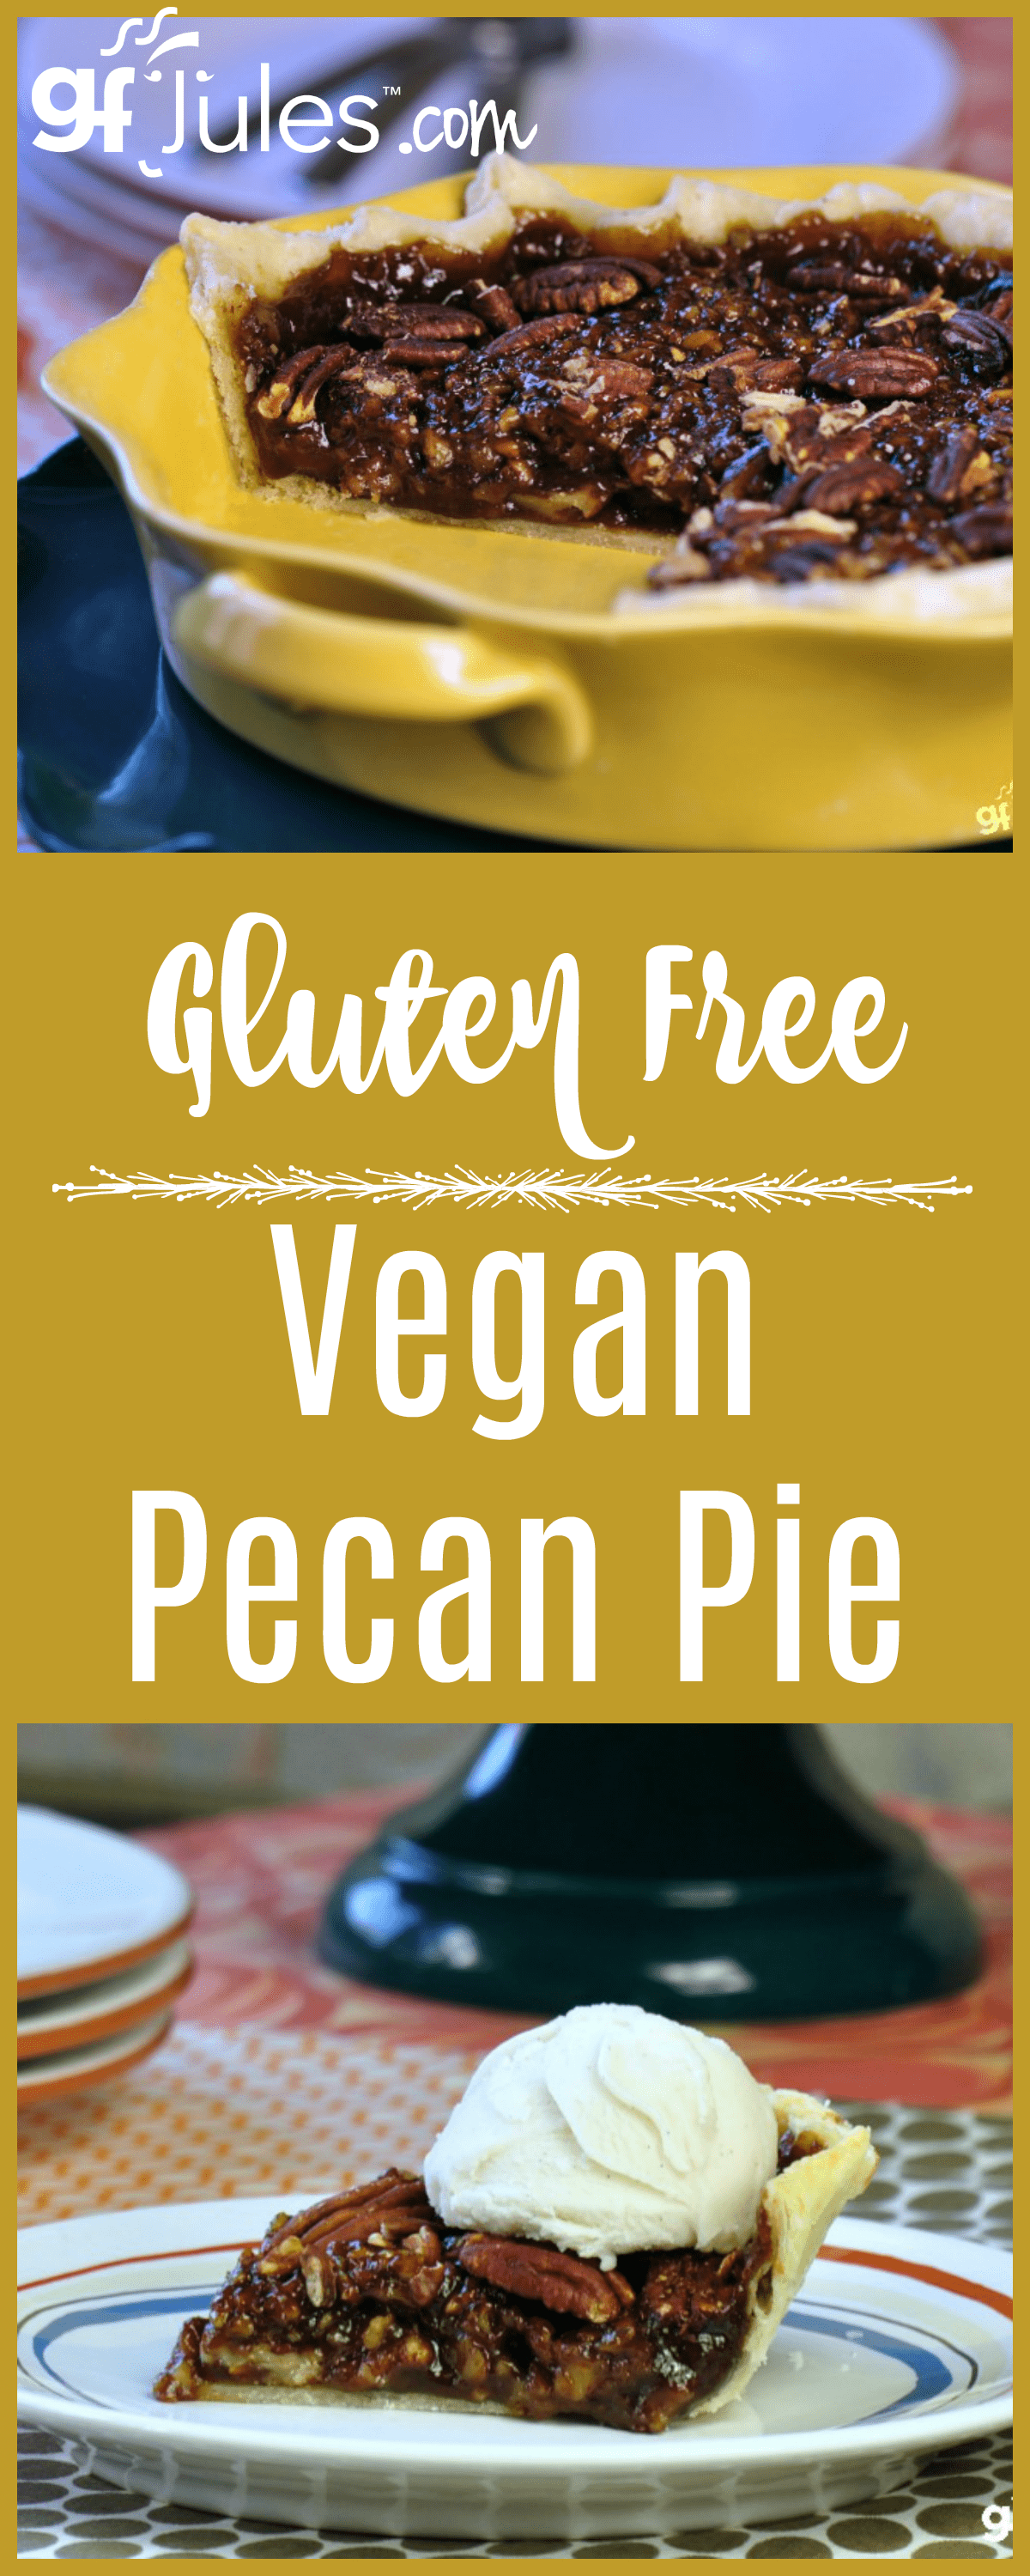 This gluten free vegan pecan pie lacks nothing in flavor, aroma & texture. You'd never know it's missing traditional ingredients like eggs, gluten and Karo!